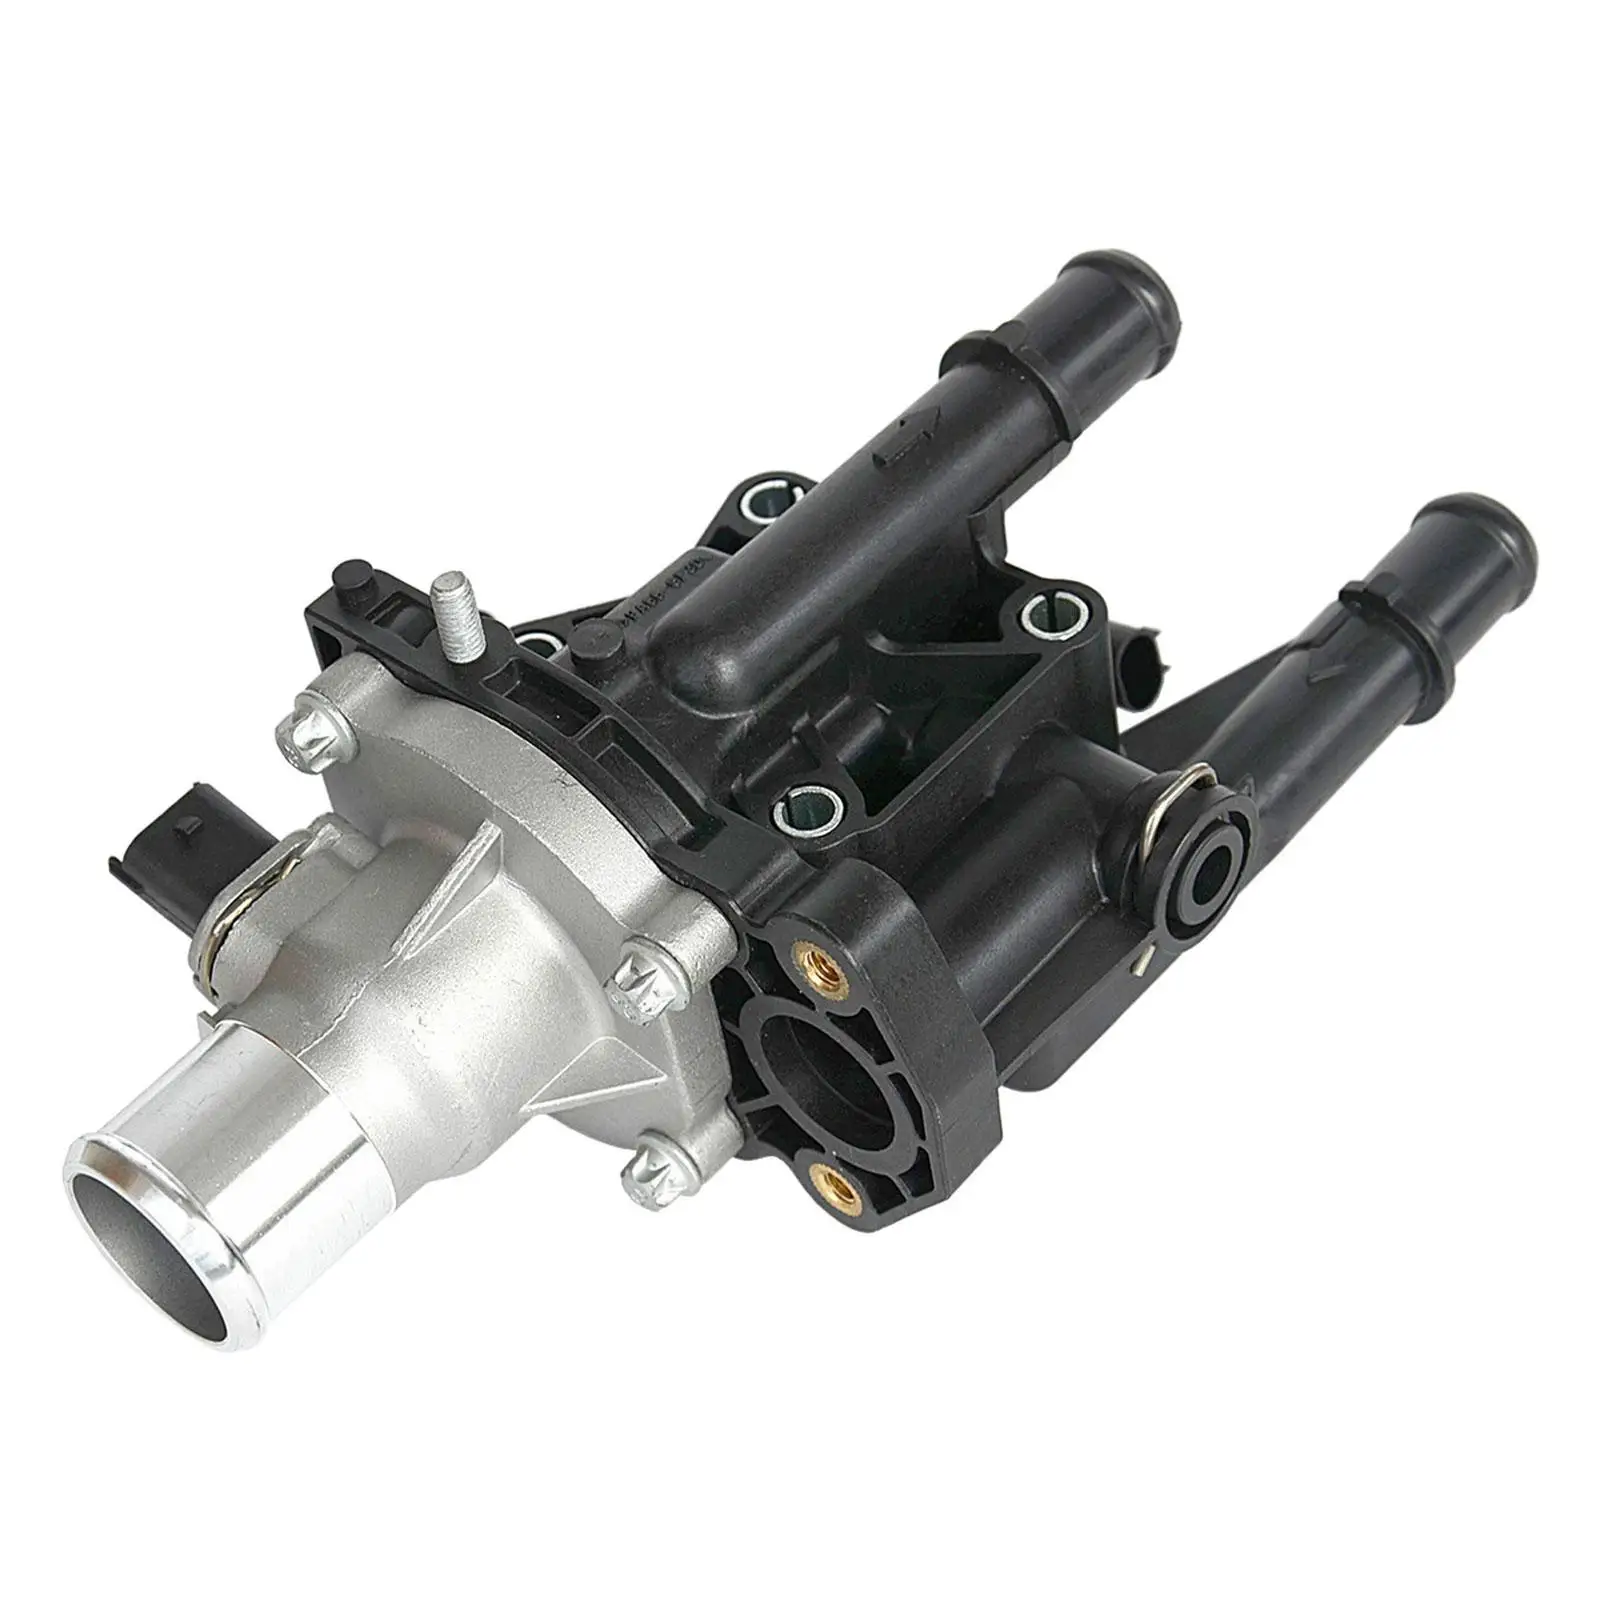 Engine Coolant Thermostat Housing Assembly with Sensor 55564890 High Performance Auto Parts Replaces Durable for Fiat Croma